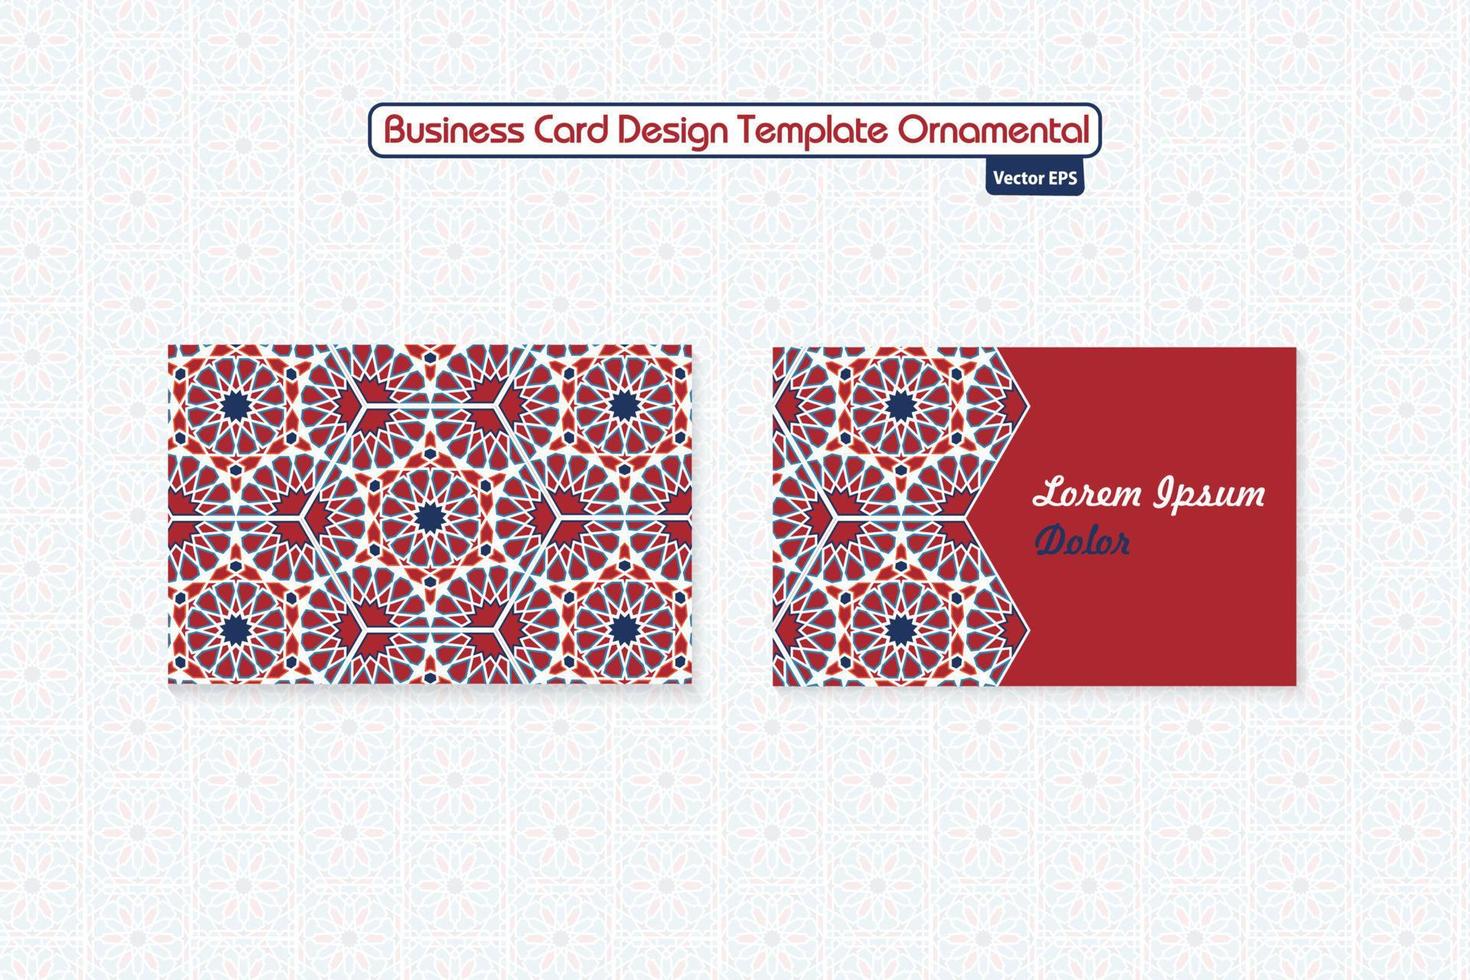 Islamic geometric decorative patterns, background collection, Islamic Business Cards. Vector image.